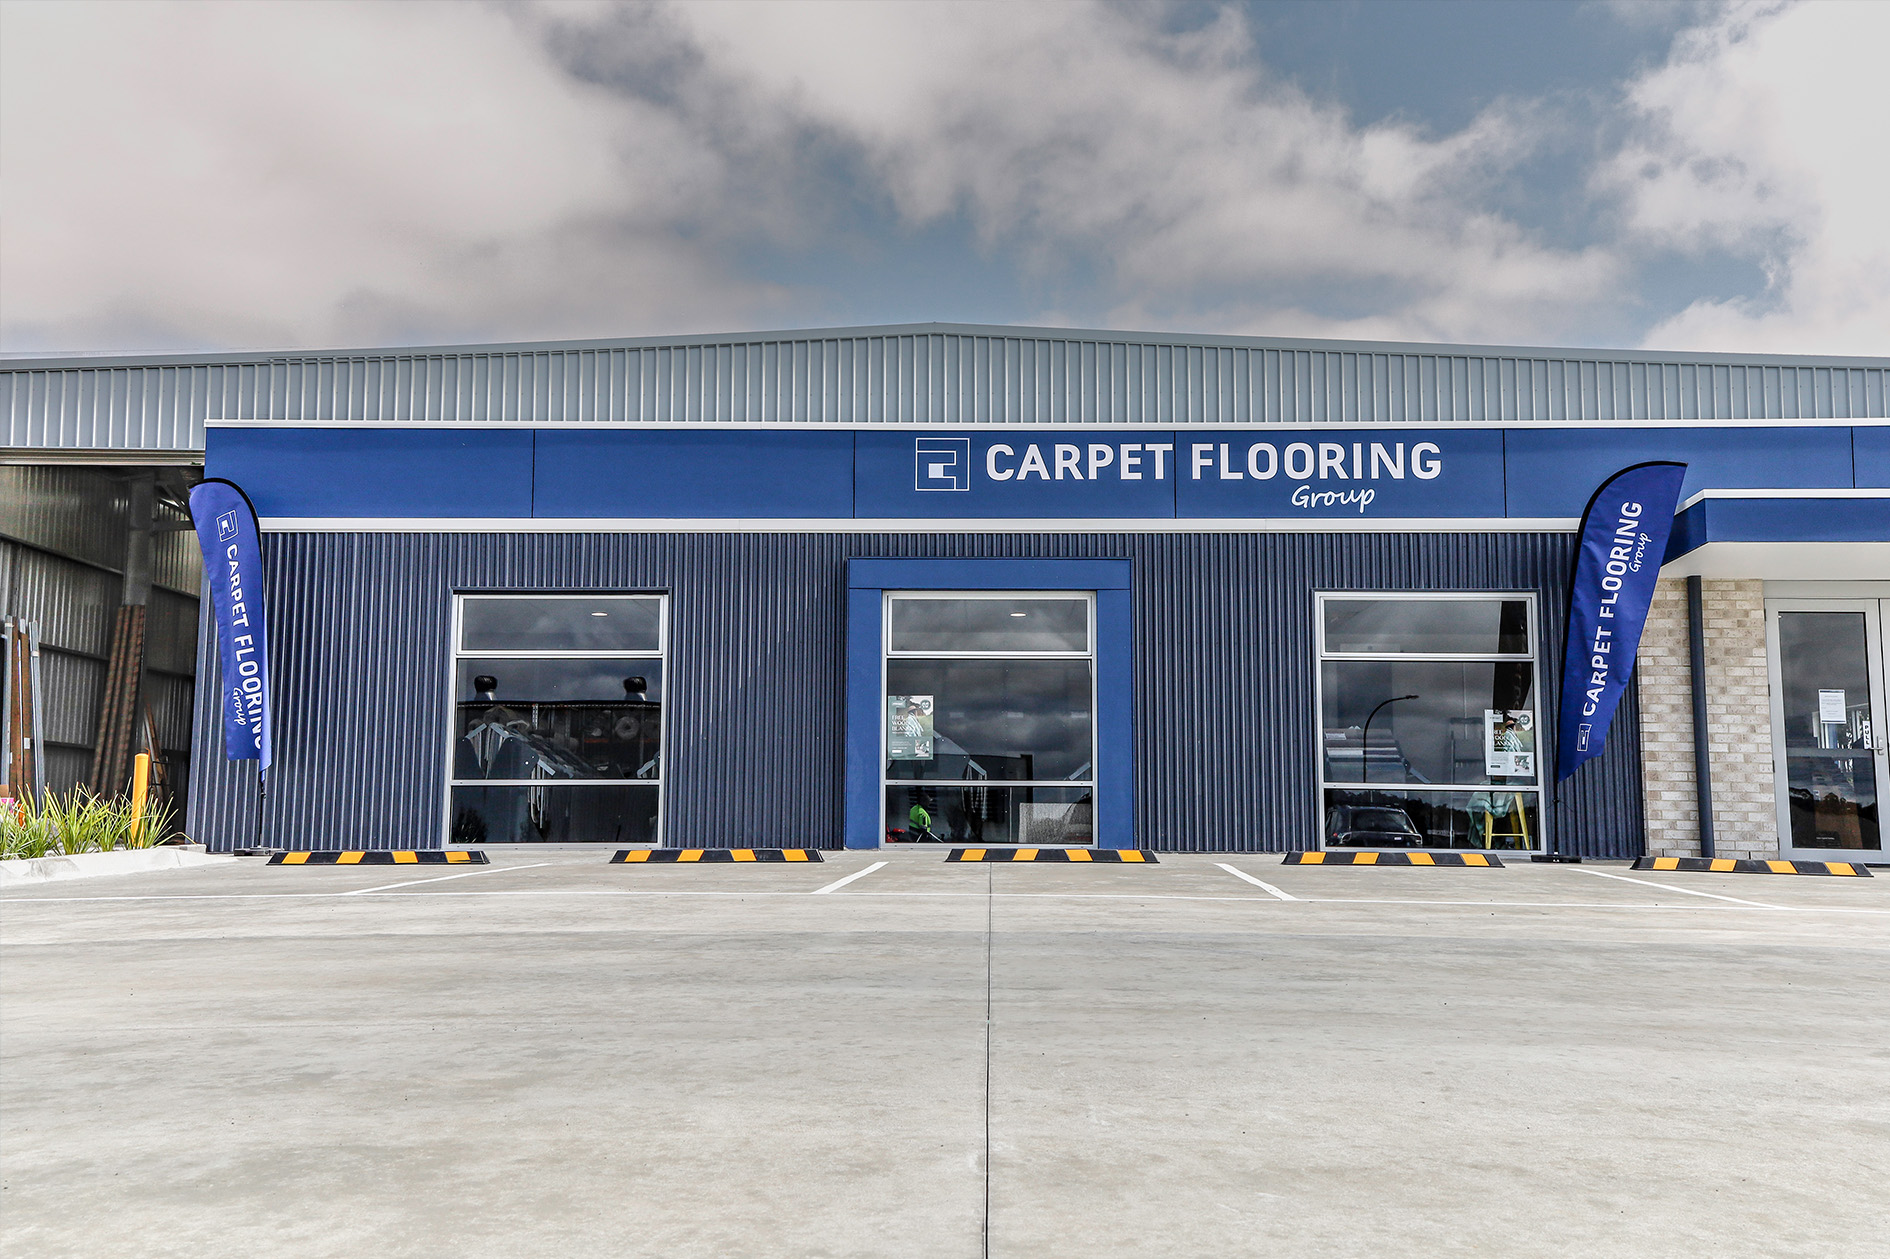 Kyneton Carpet Court combined retail and hardware store